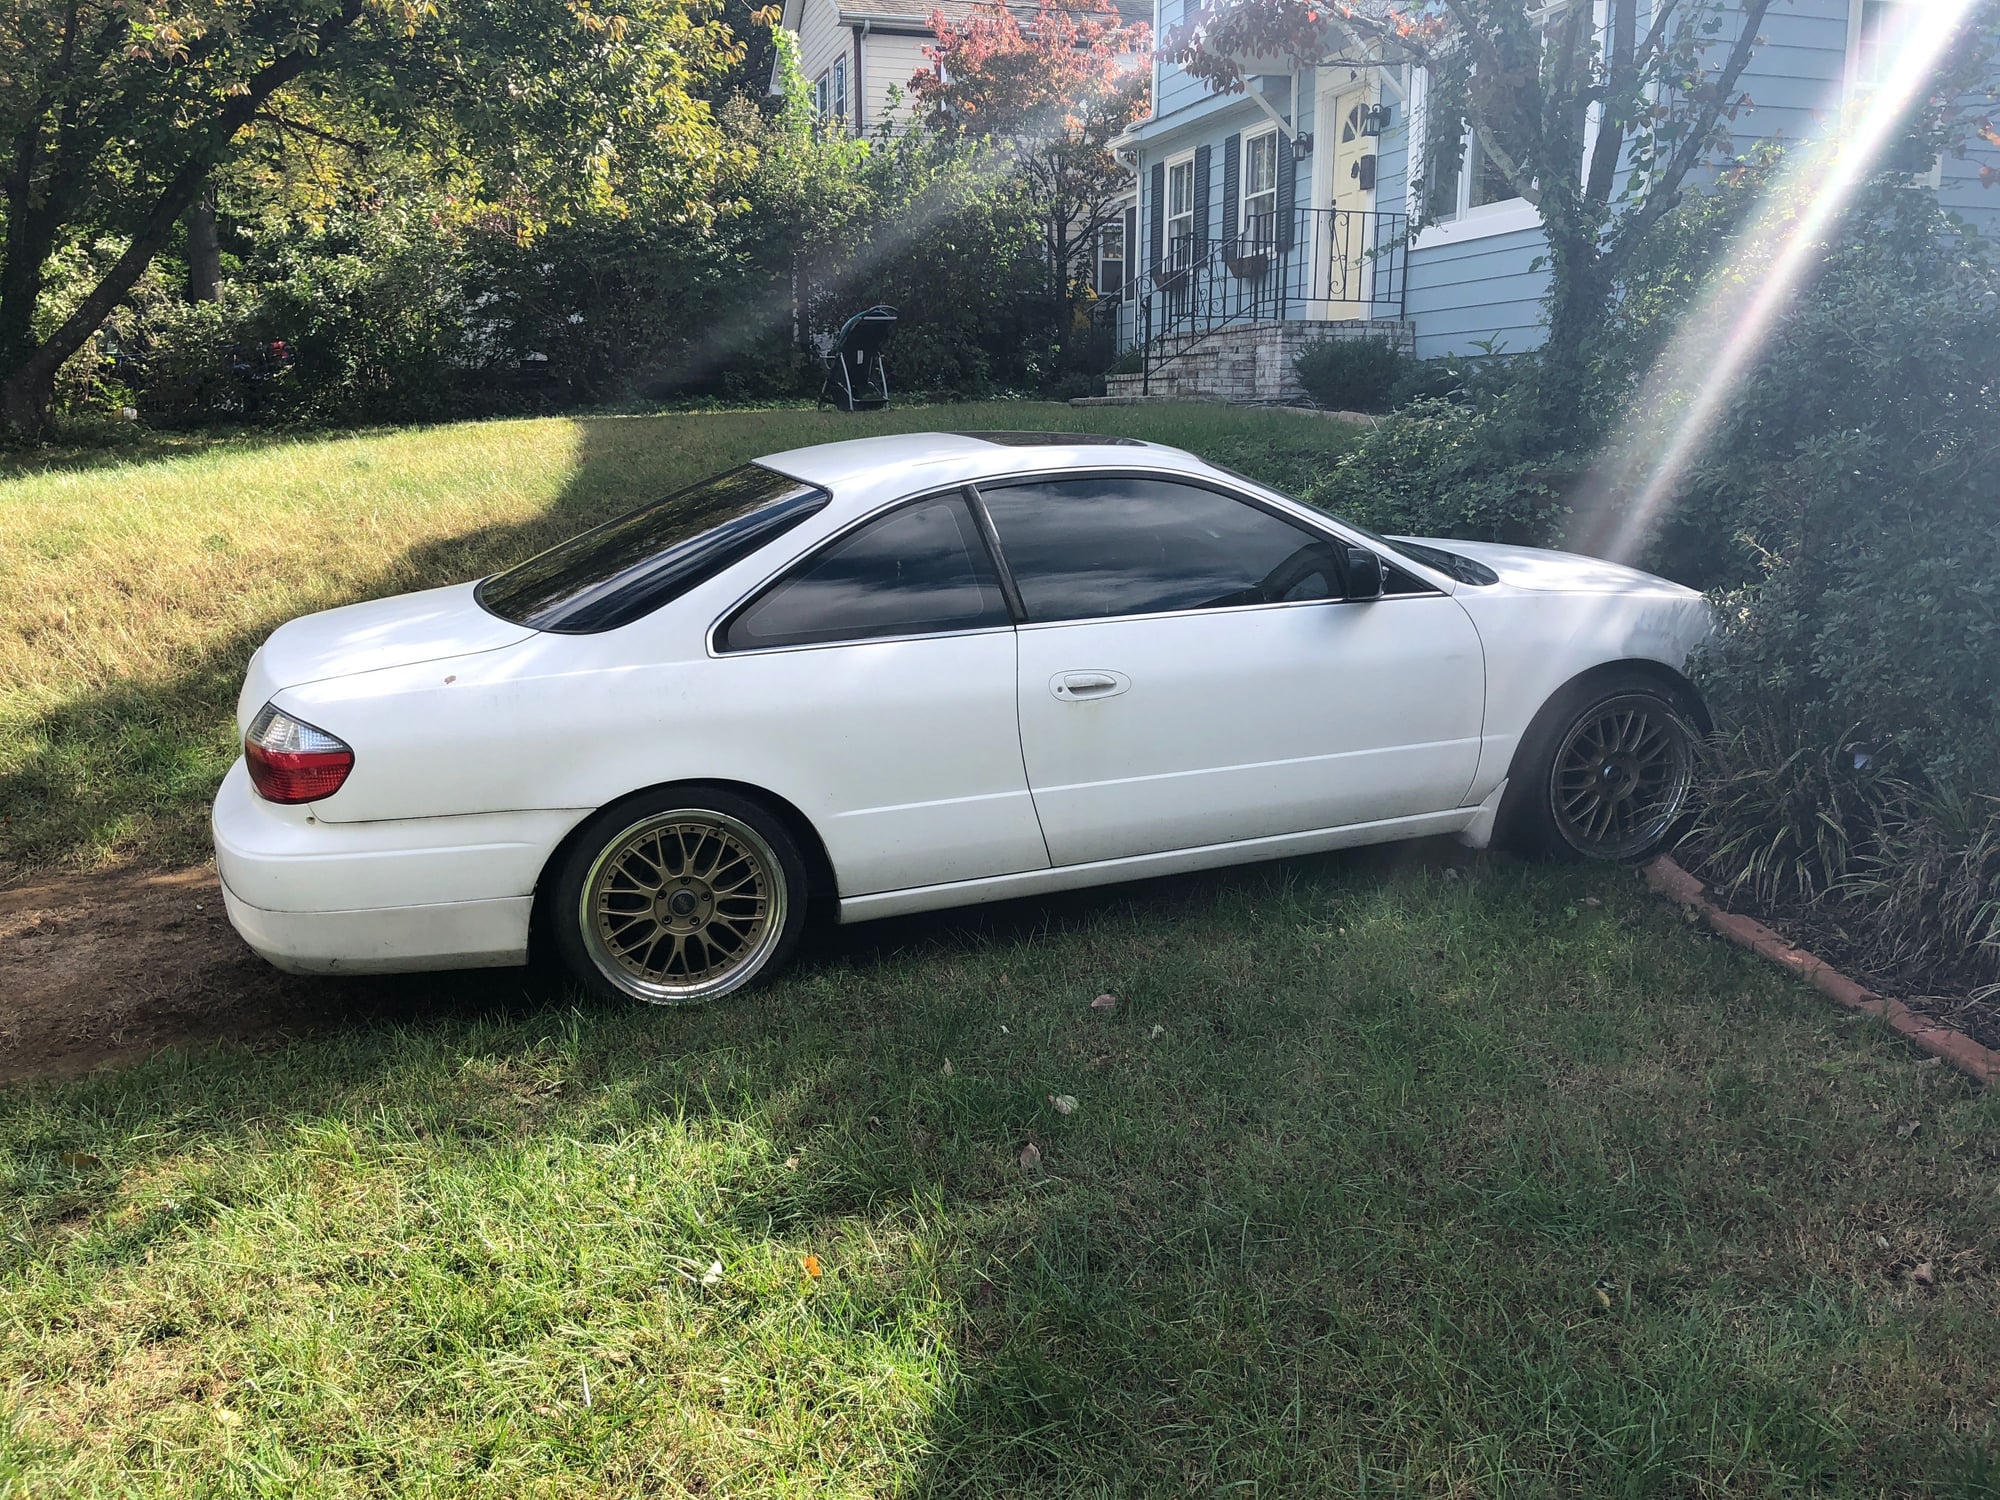 2002 Acura CL - FS: 2002 cl $3200 steal!! - Used - VIN 19UYA42642A000493 - 168,427 Miles - 6 cyl - 2WD - Automatic - Coupe - White - Annapolis, MD 21401, United States